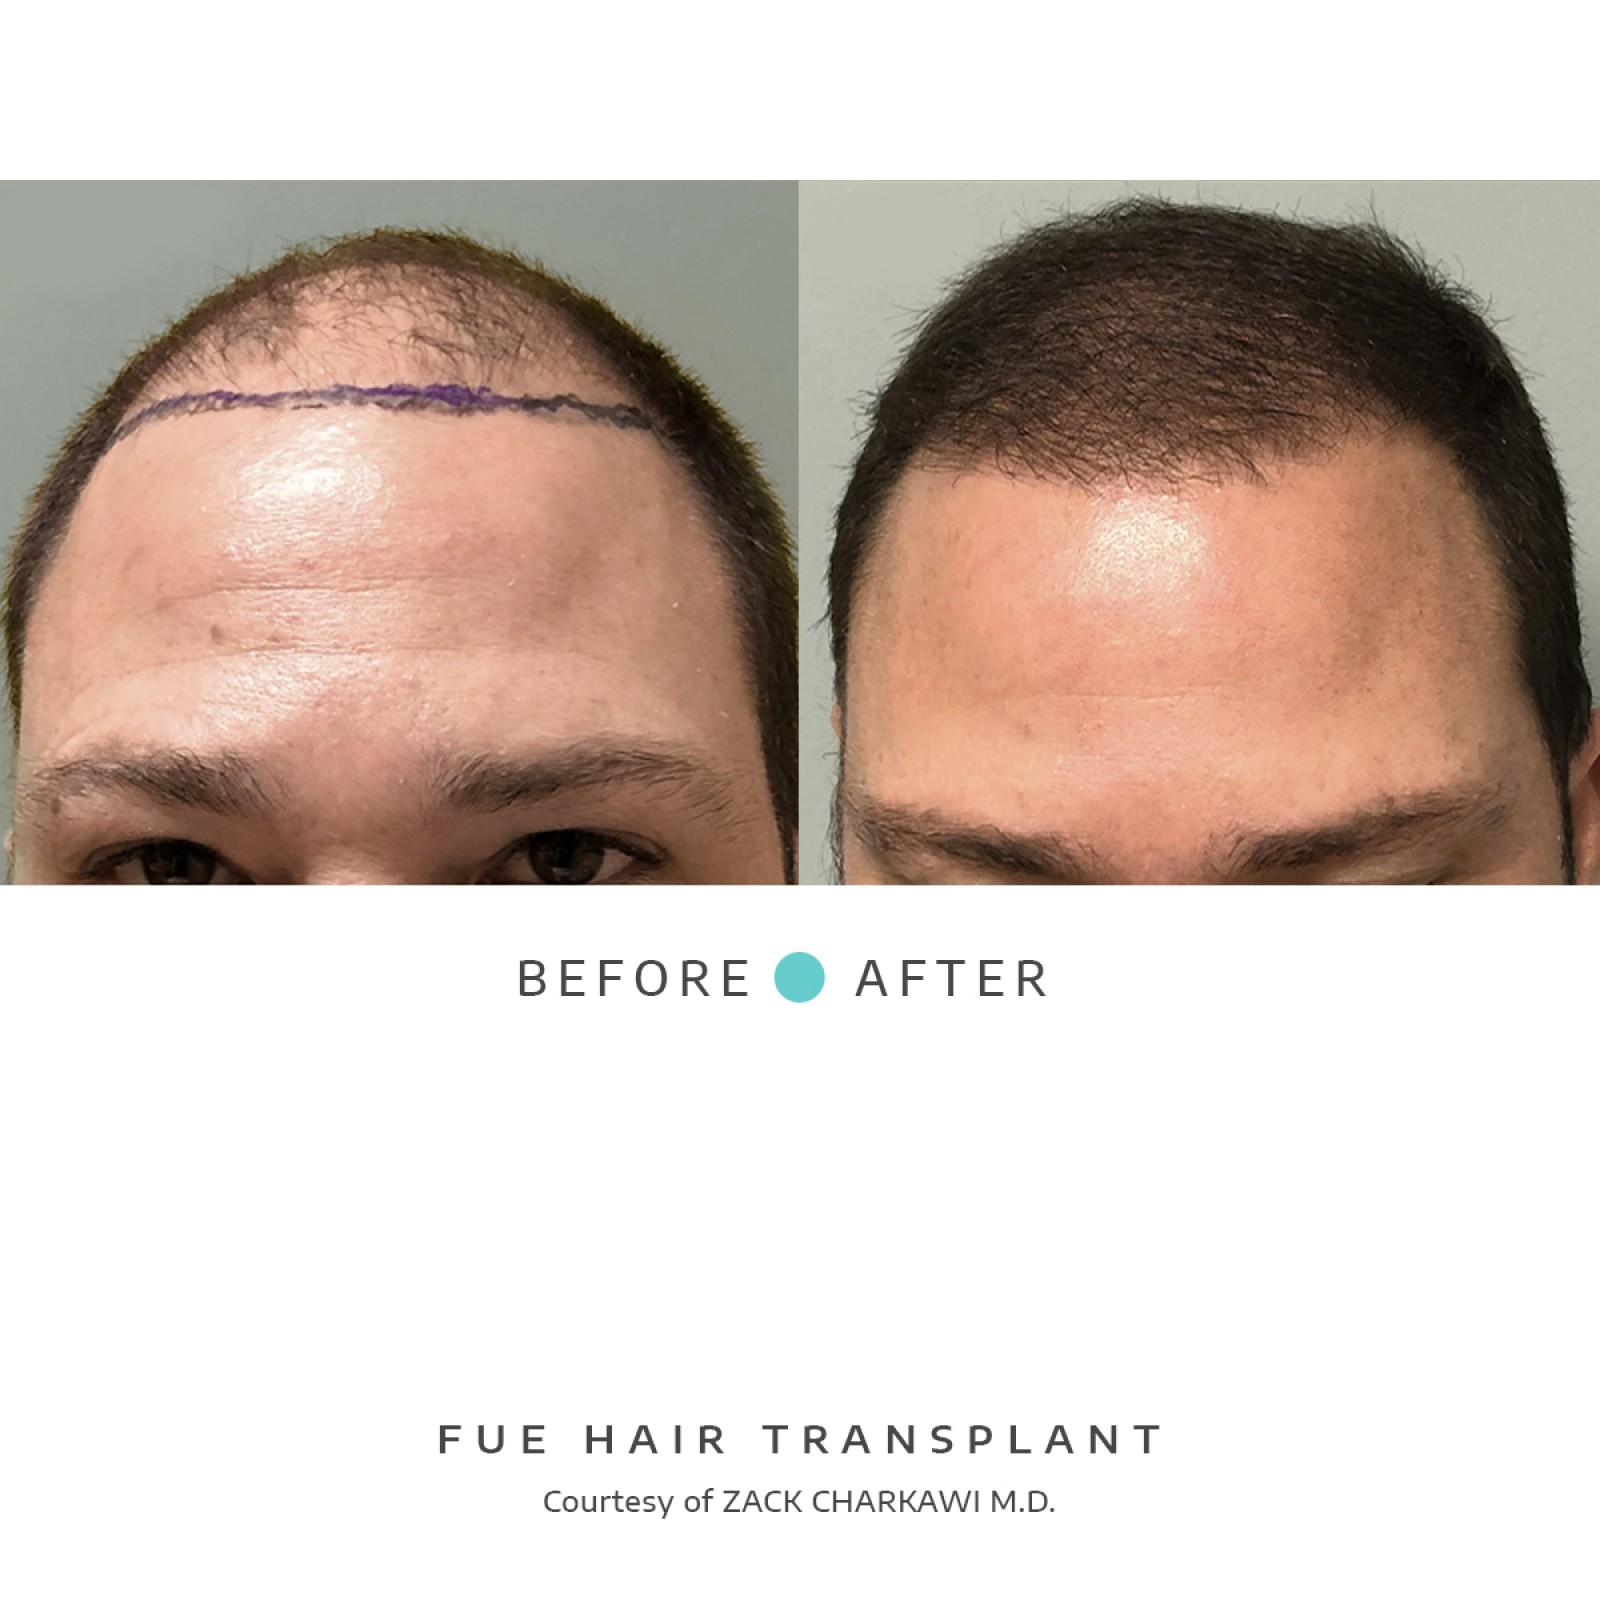 The before image shows balding and thinning hair of a man, while the after image depicts a successful FUE hair transplant with the scalp now with natural-looking hair.